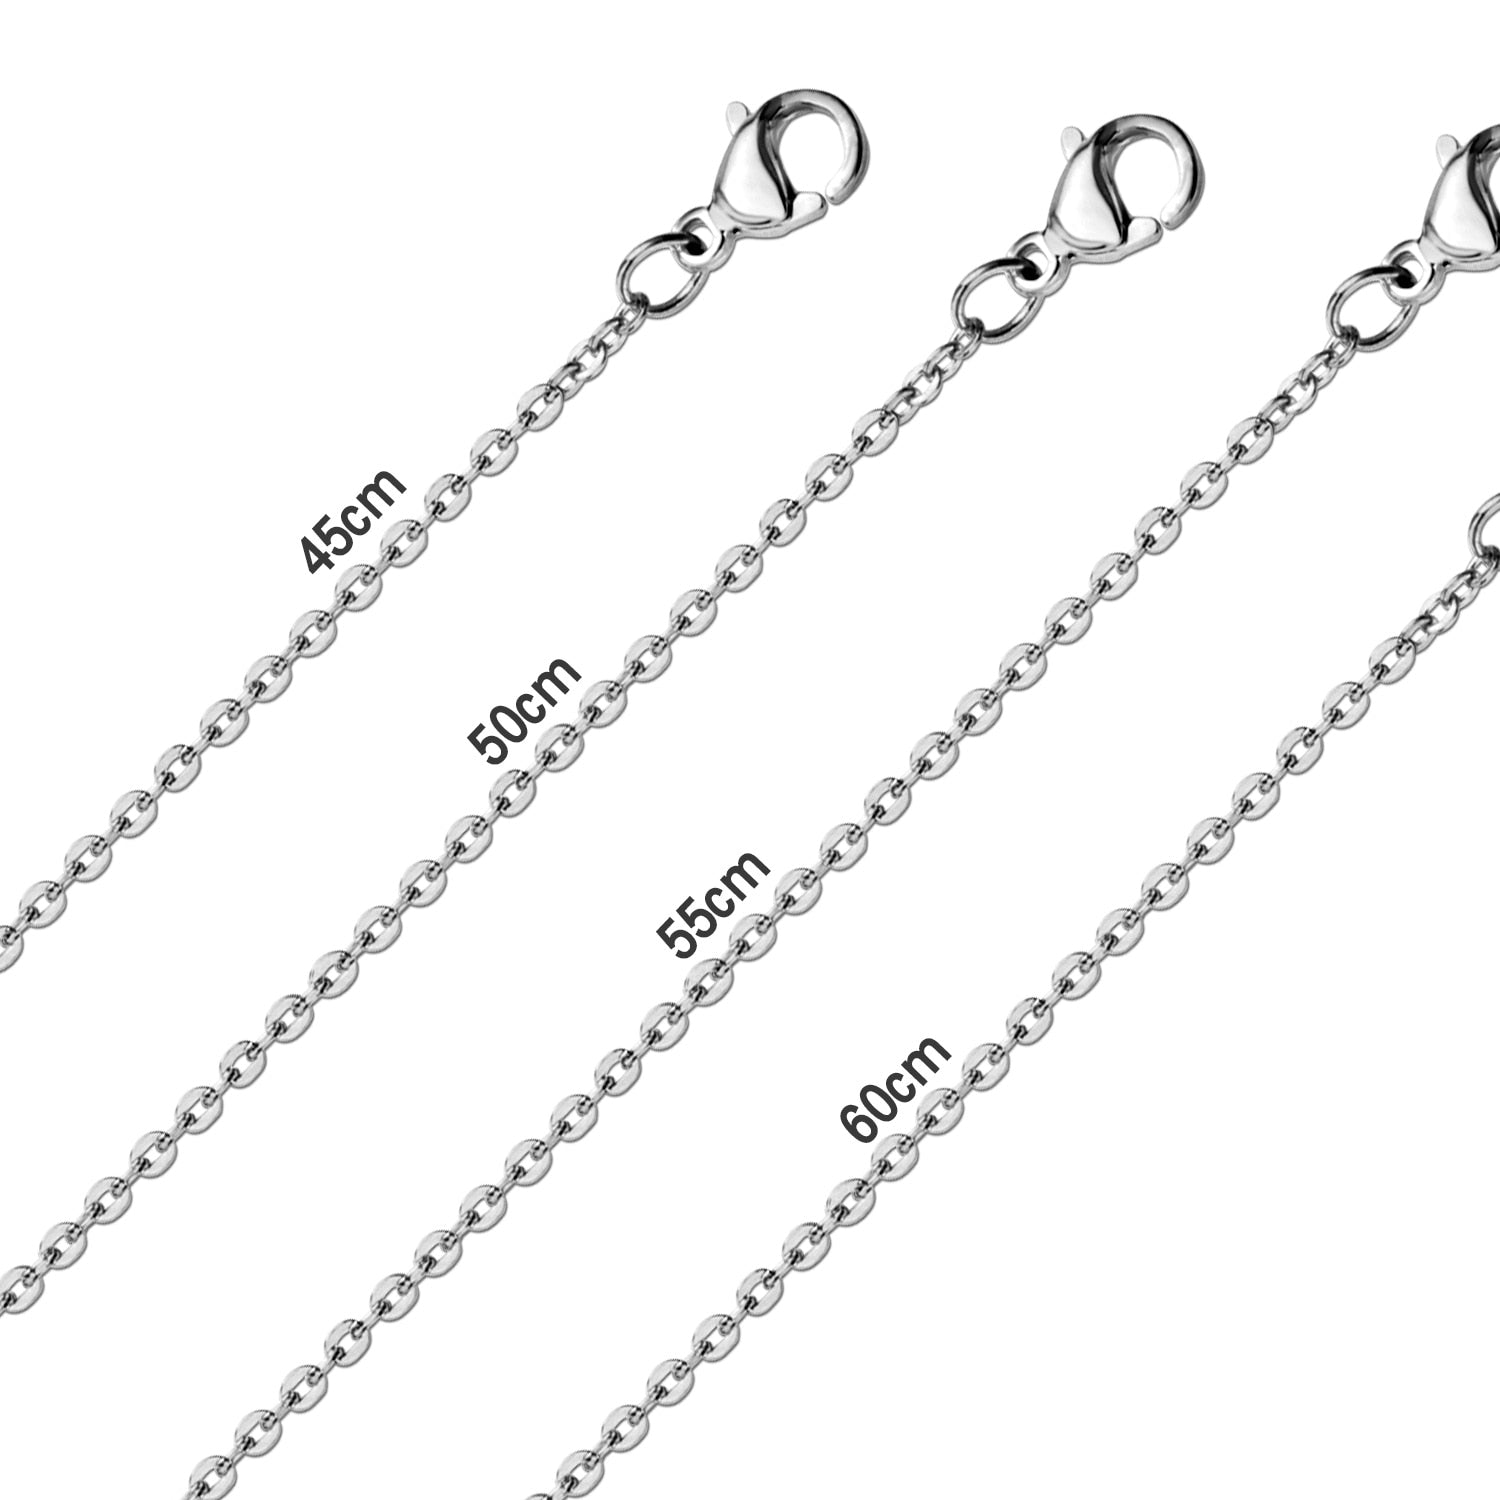 LUXUKISSKIDS Stainless Steel Necklace Chains Woman 10pcs/lot Bulk Wholesale DIY Rolo 2mm Chain No Fade Choker For Jewelry Making